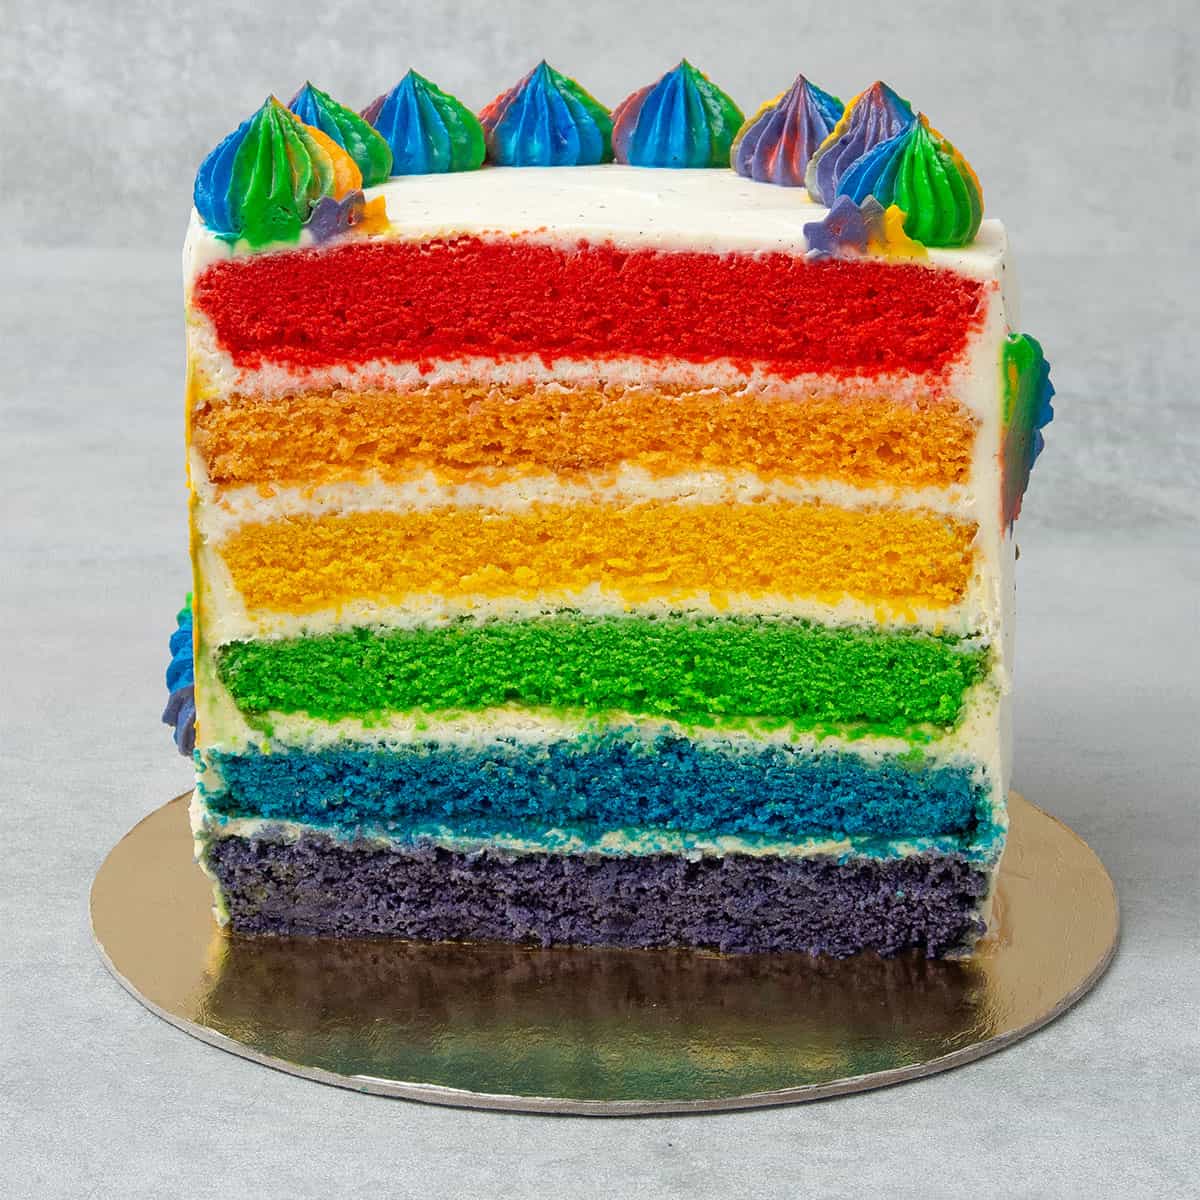 rainbow-layer-cake-recipes-to-wow-your-guests